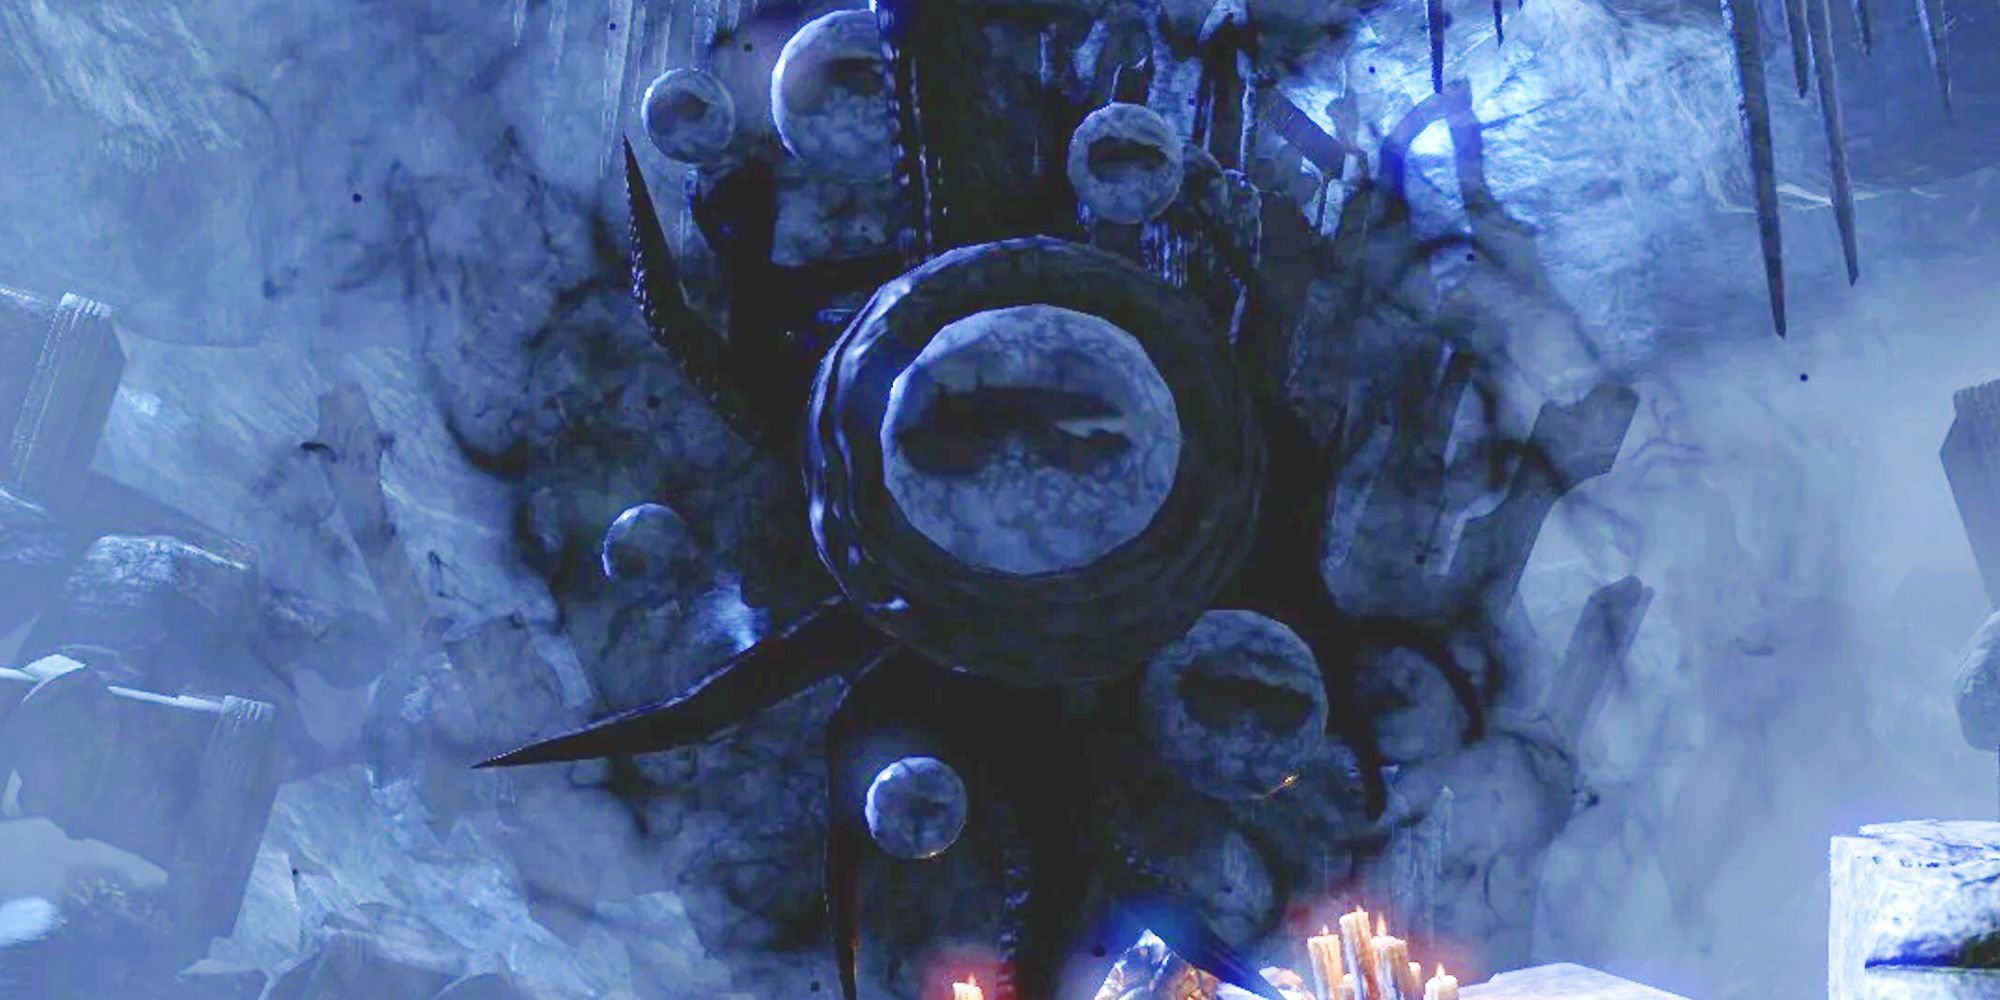 ESO Hermaeus Mora, a floating mess of black tentacles and eyes, in an ice cavern above some candles